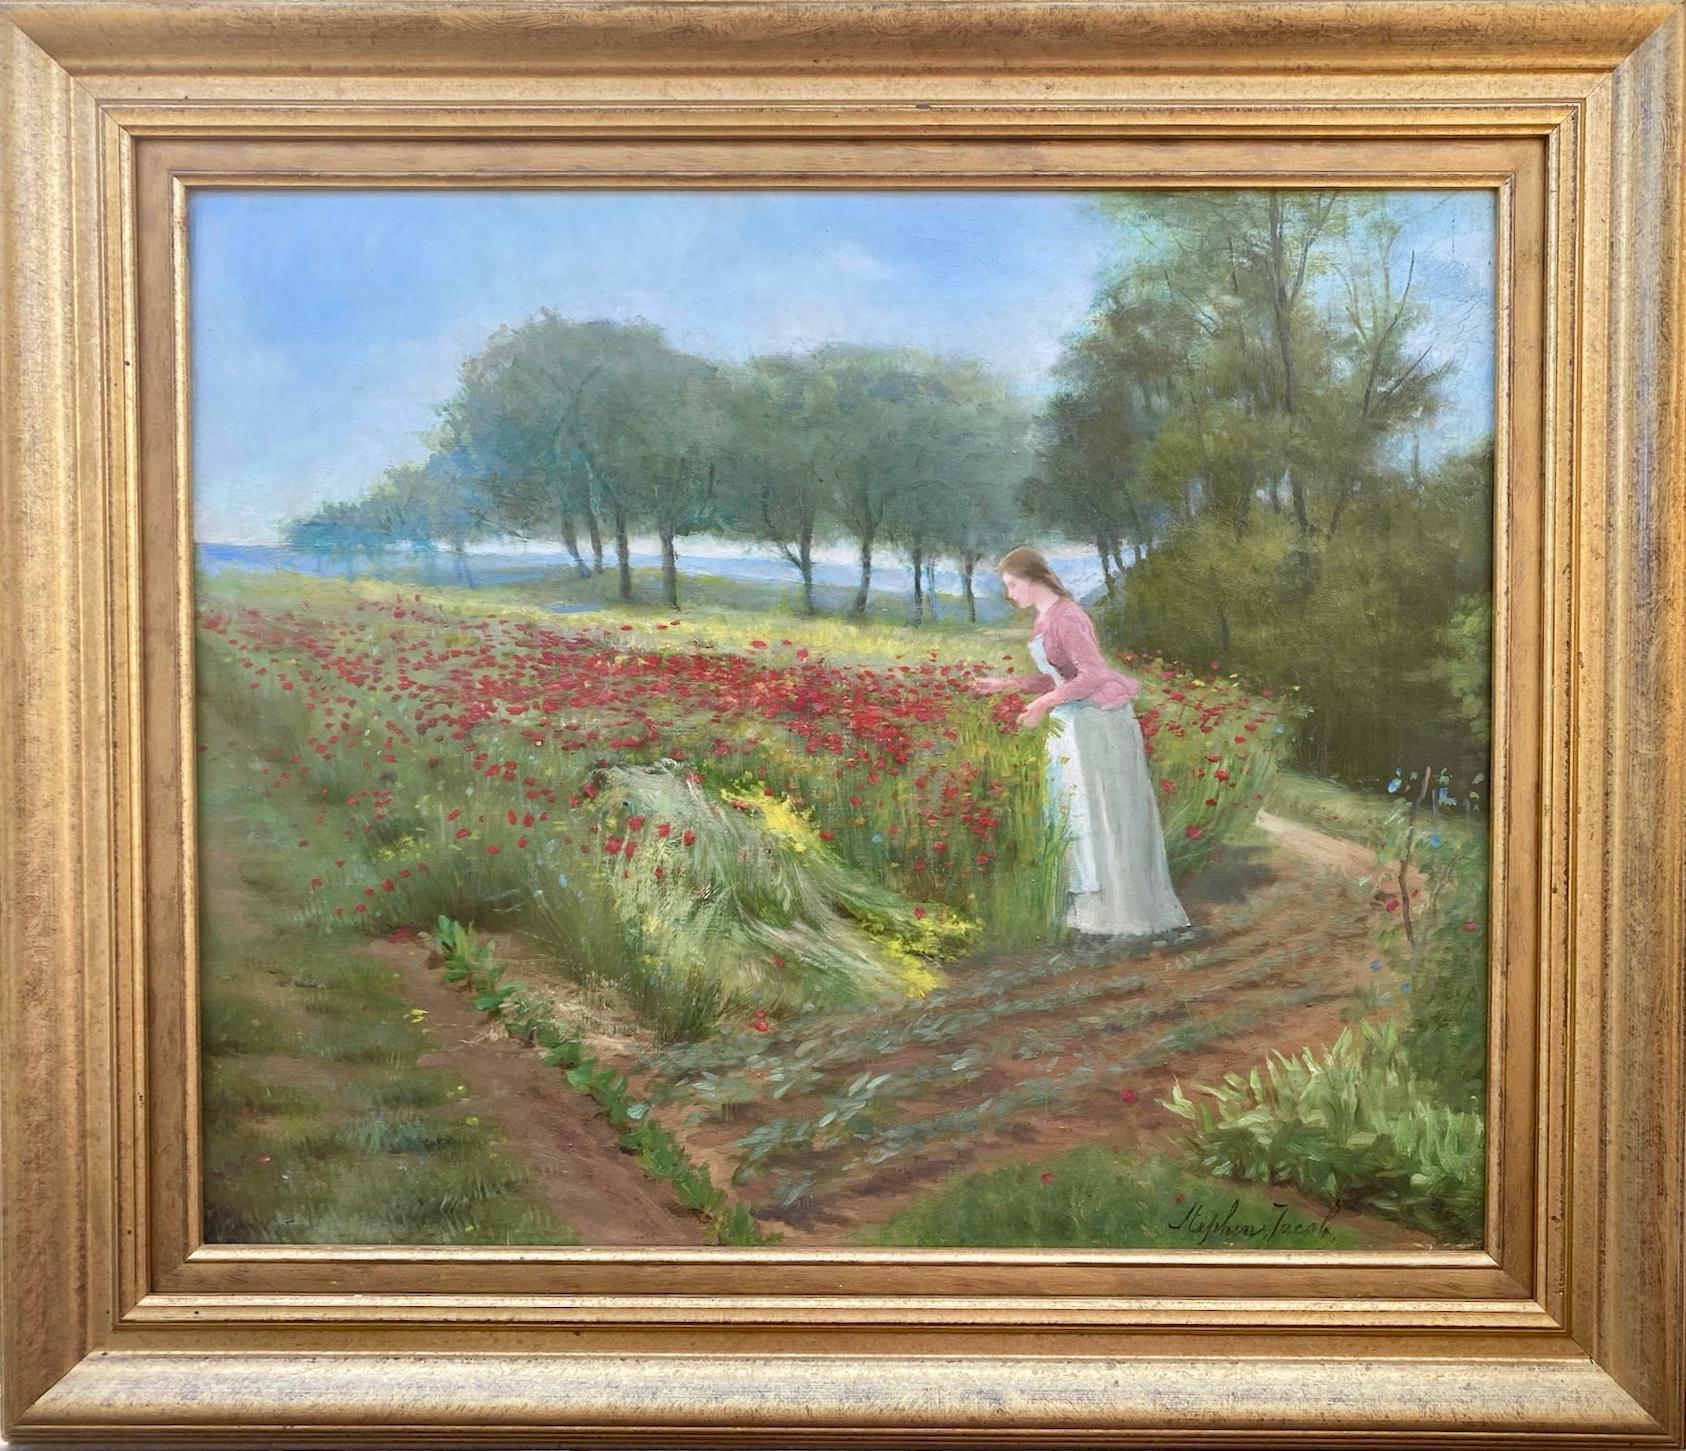 Stephen Jacob Landscape Painting - Gathering wild red poppies: woman in a poppy field French Impressionist painting